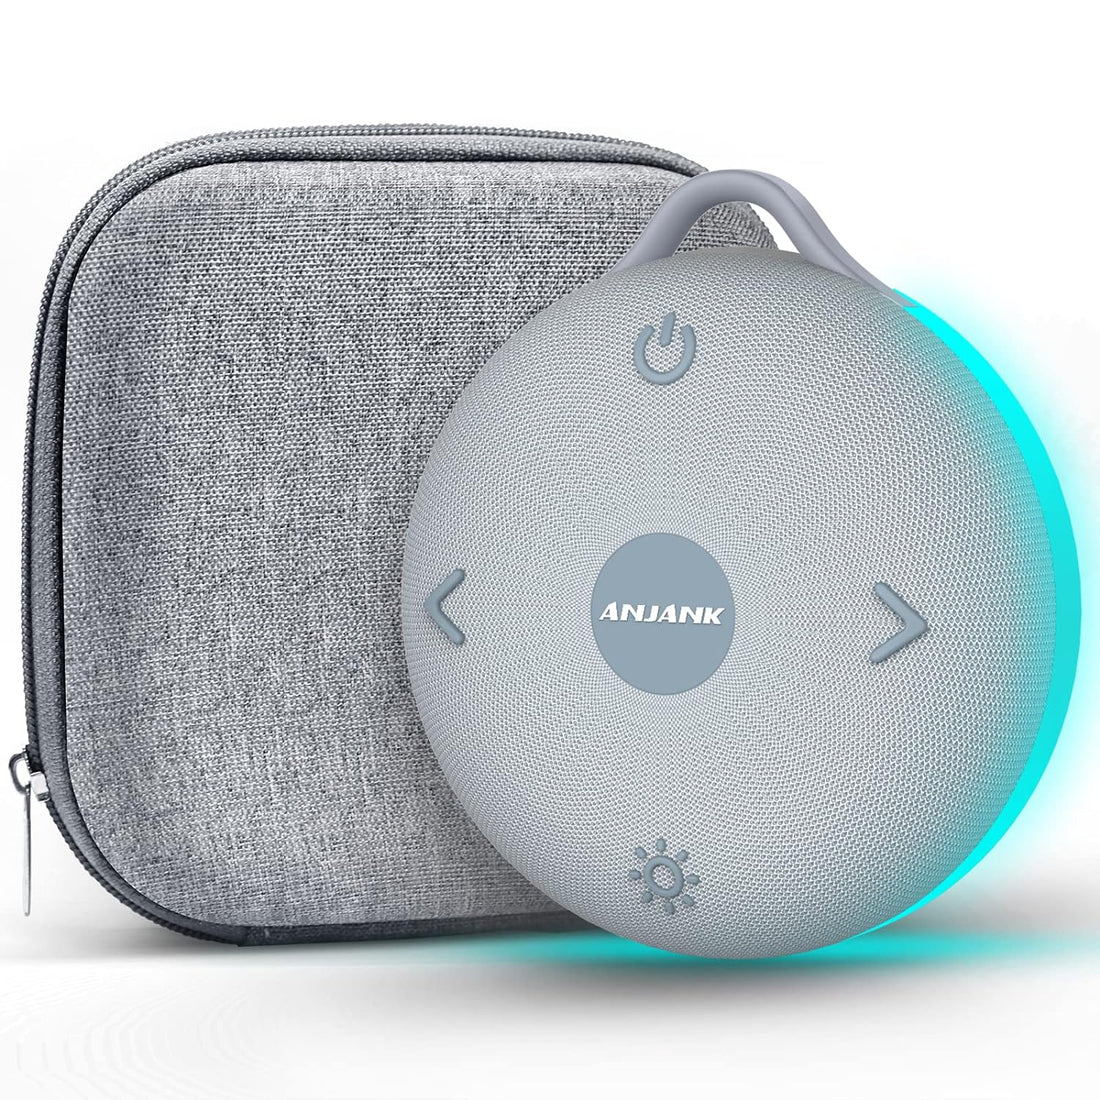 Portable White Noise Machine for Baby Sleeping | 8 Night Lights | 17 Soothing Sounds | USB Rechargeable | Safe Clip Easy Hanging & Child Lock | Compact and Lightweight for On-The-Go & Travel, Kids